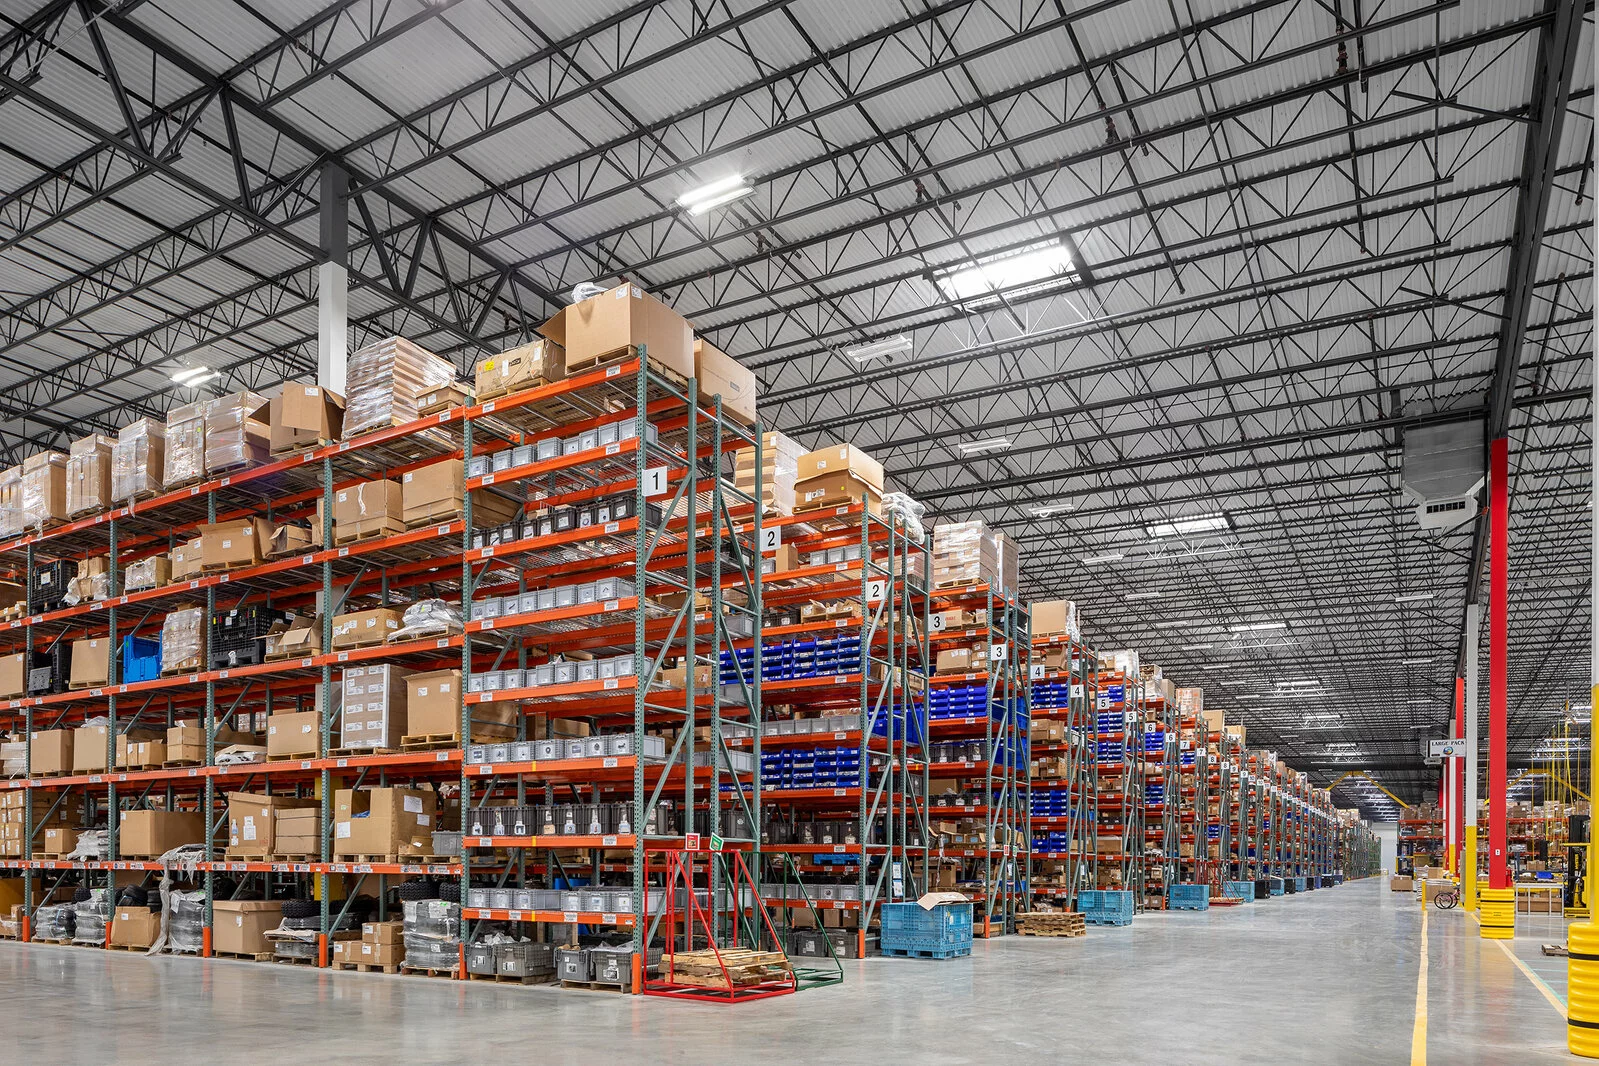 interior storage and distributions facility, countless rows of industrial storage racks, concrete floors.